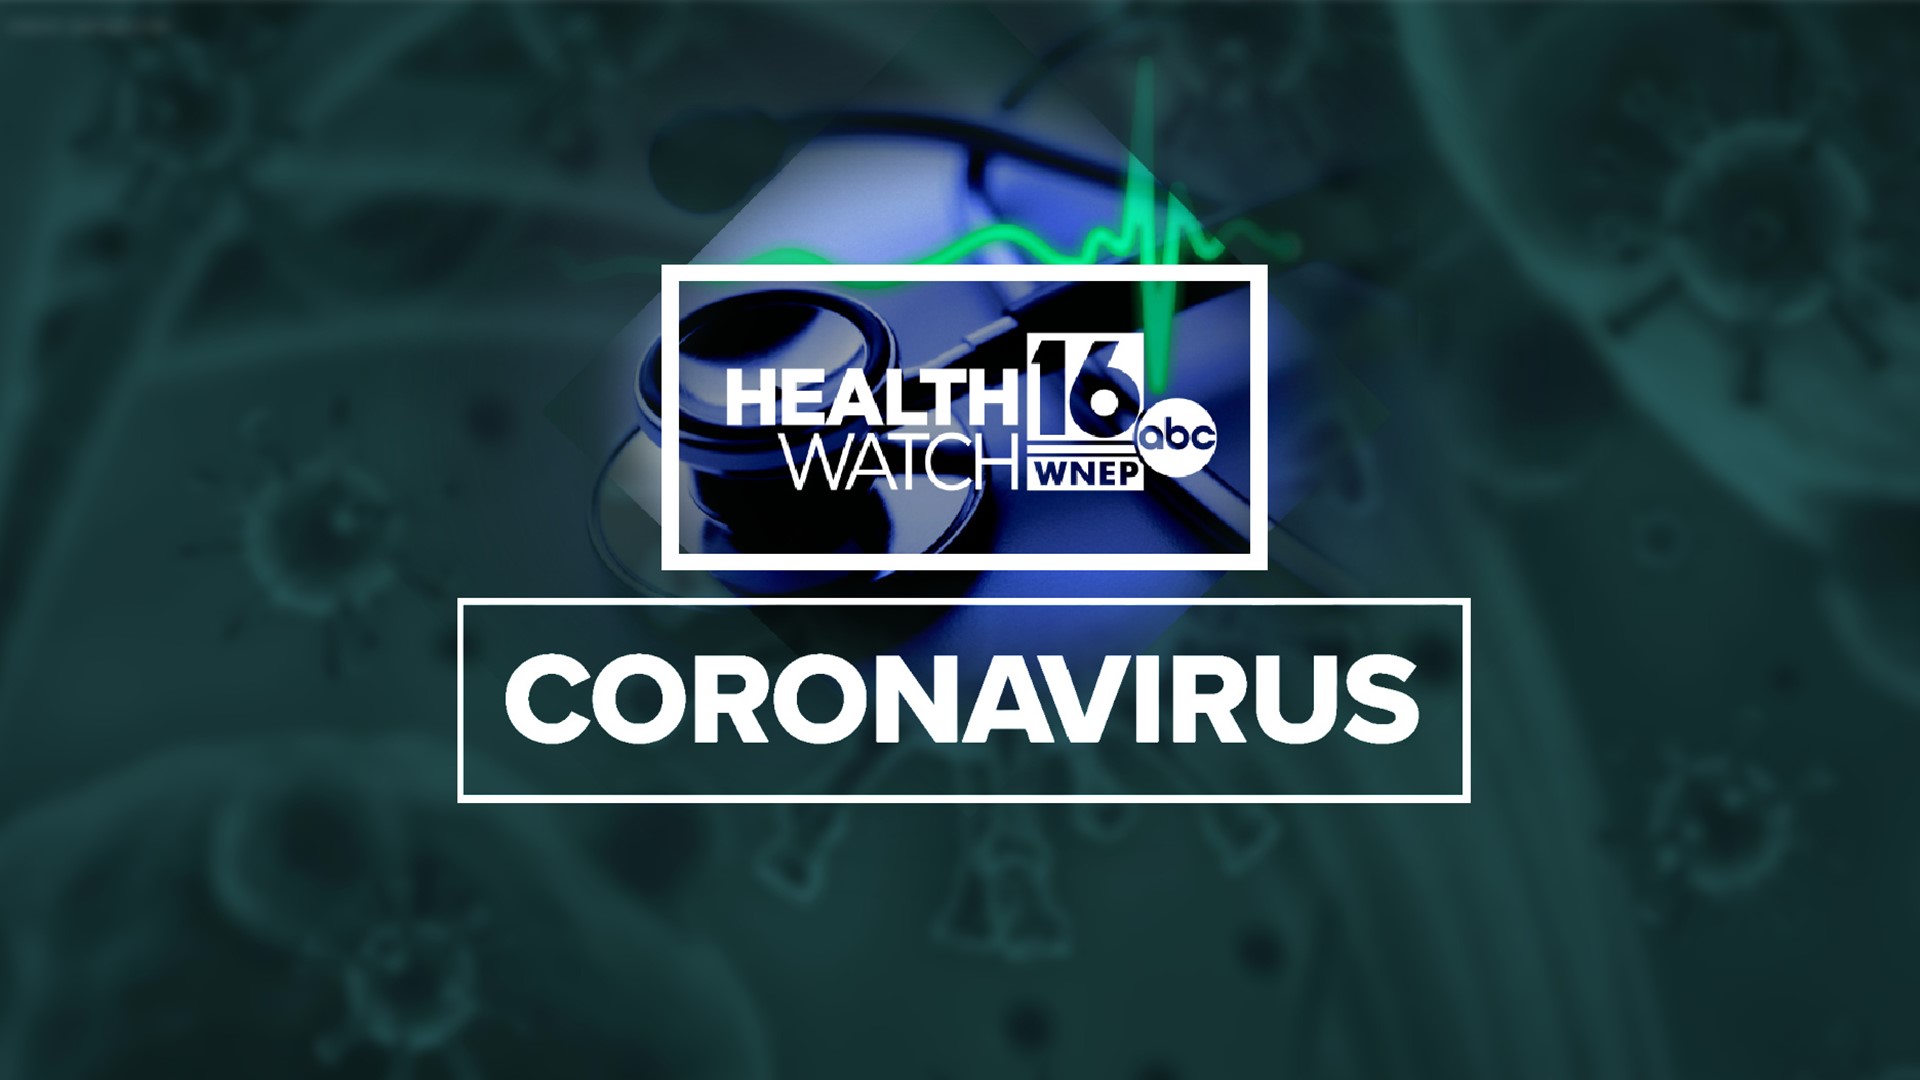 We spoke with a Geisinger doctor about his thoughts on the rate of vaccinations slowing in this Healthwatch 16 report.